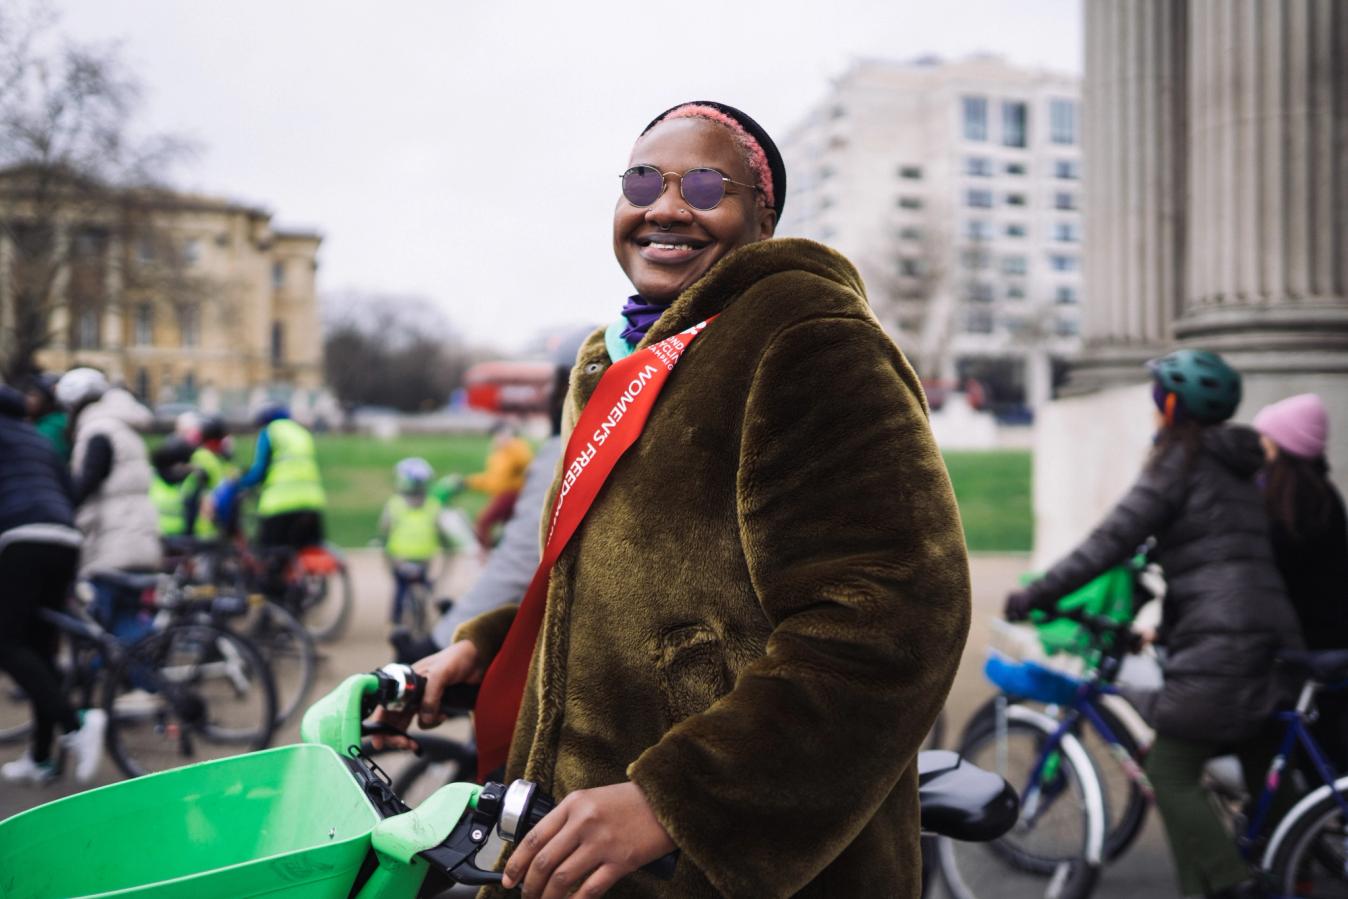 Lime bikes are free for protest riders on the day